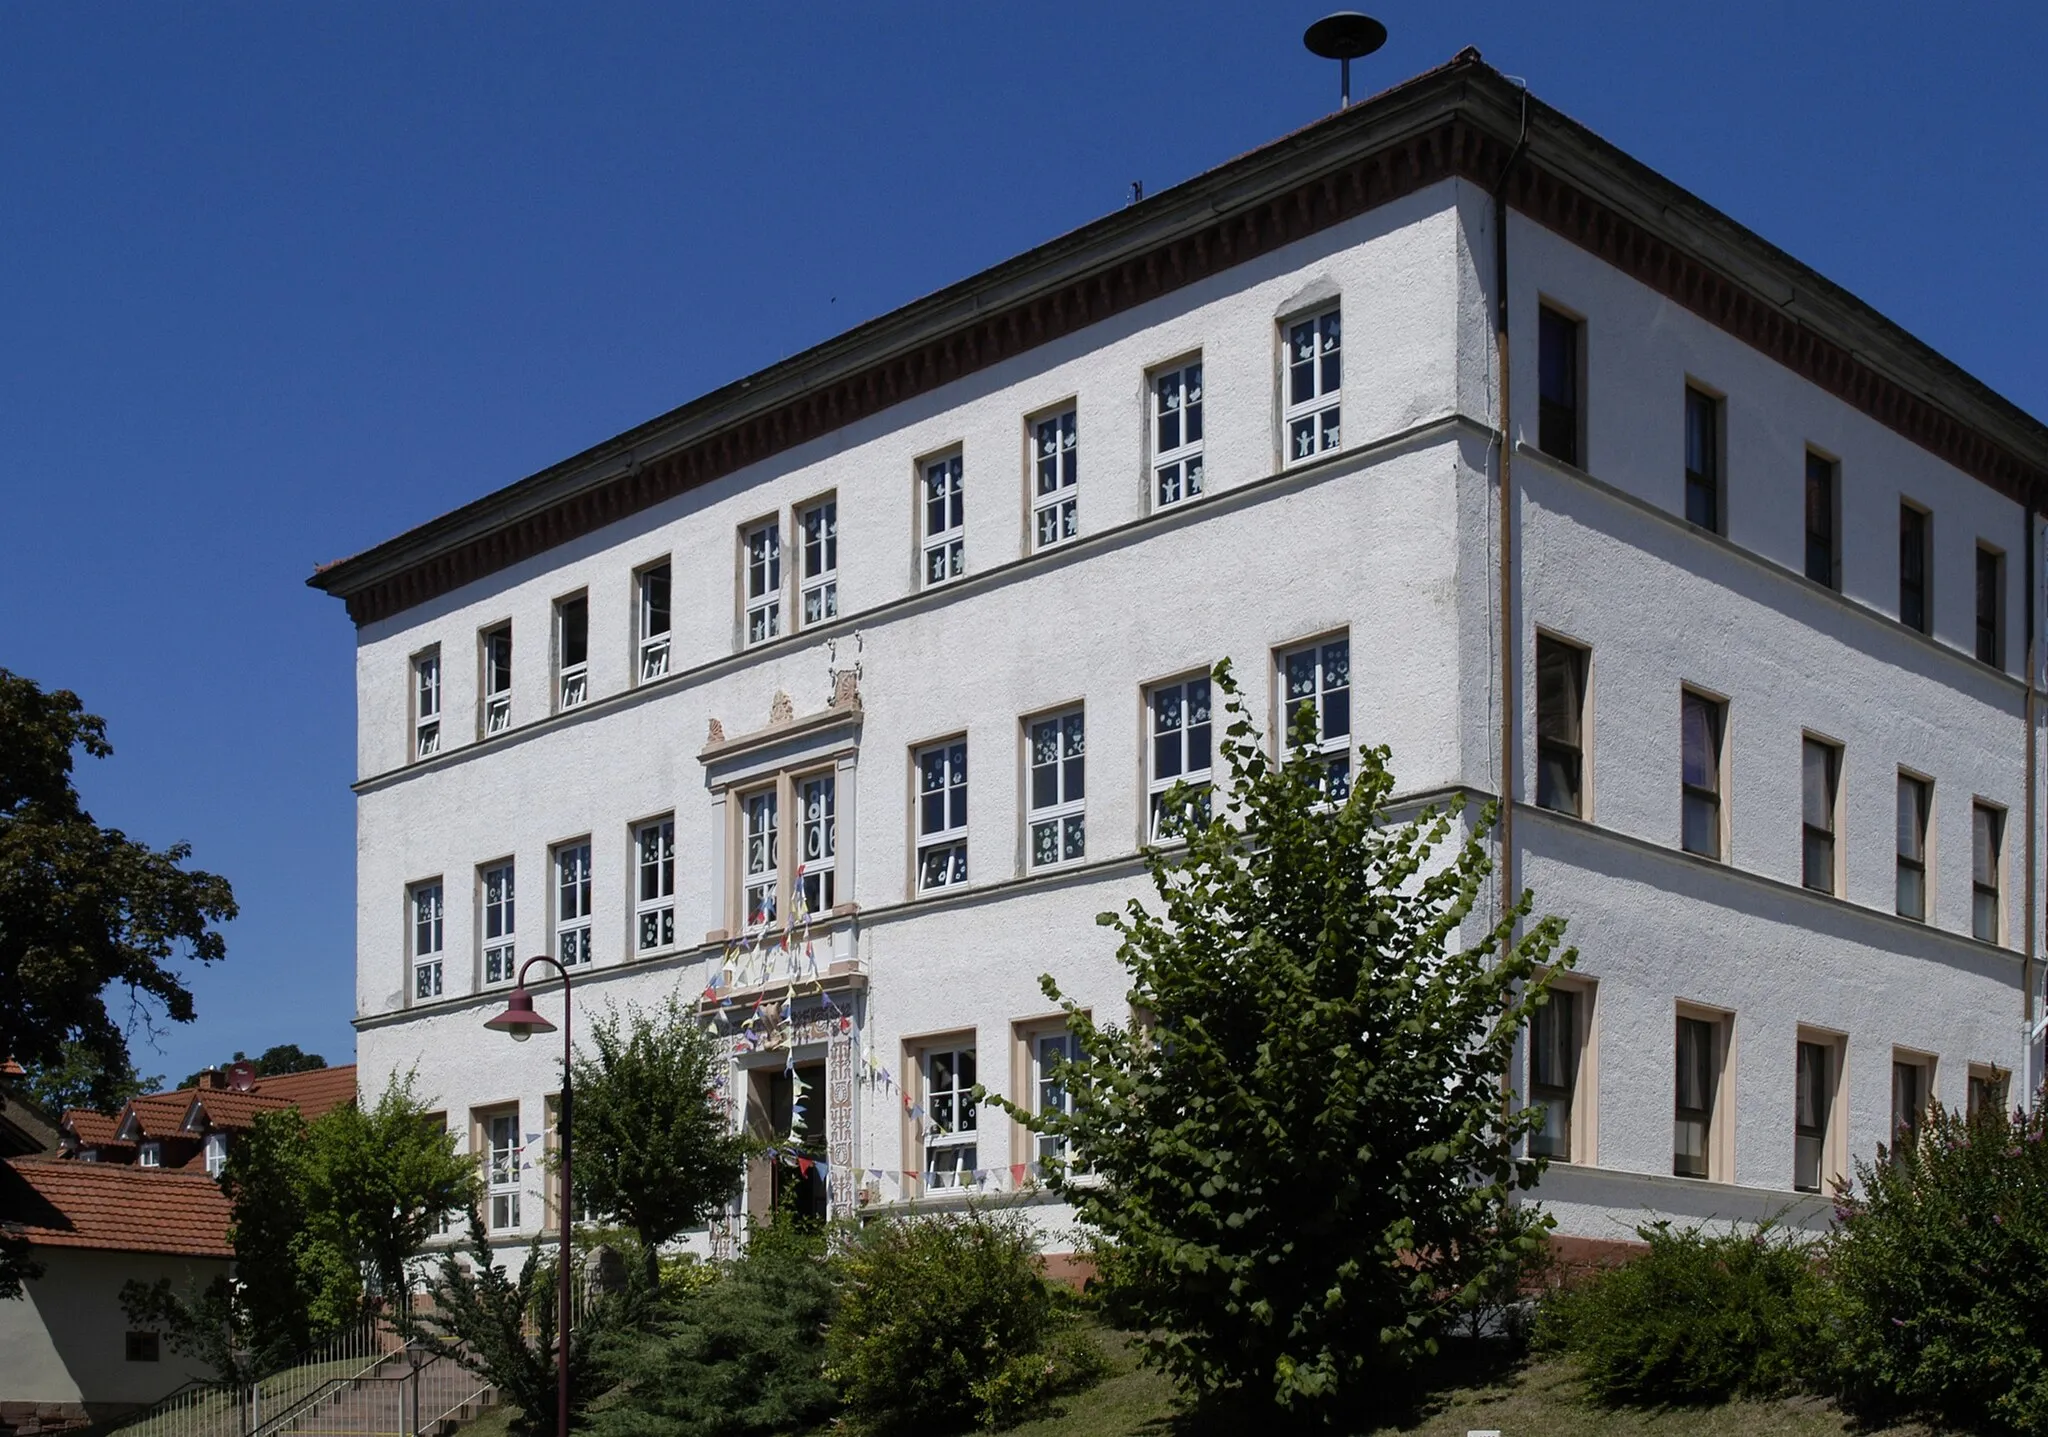 Photo showing: The school building was built in 1881. It now houses the primary school Stadtlengsfeld.